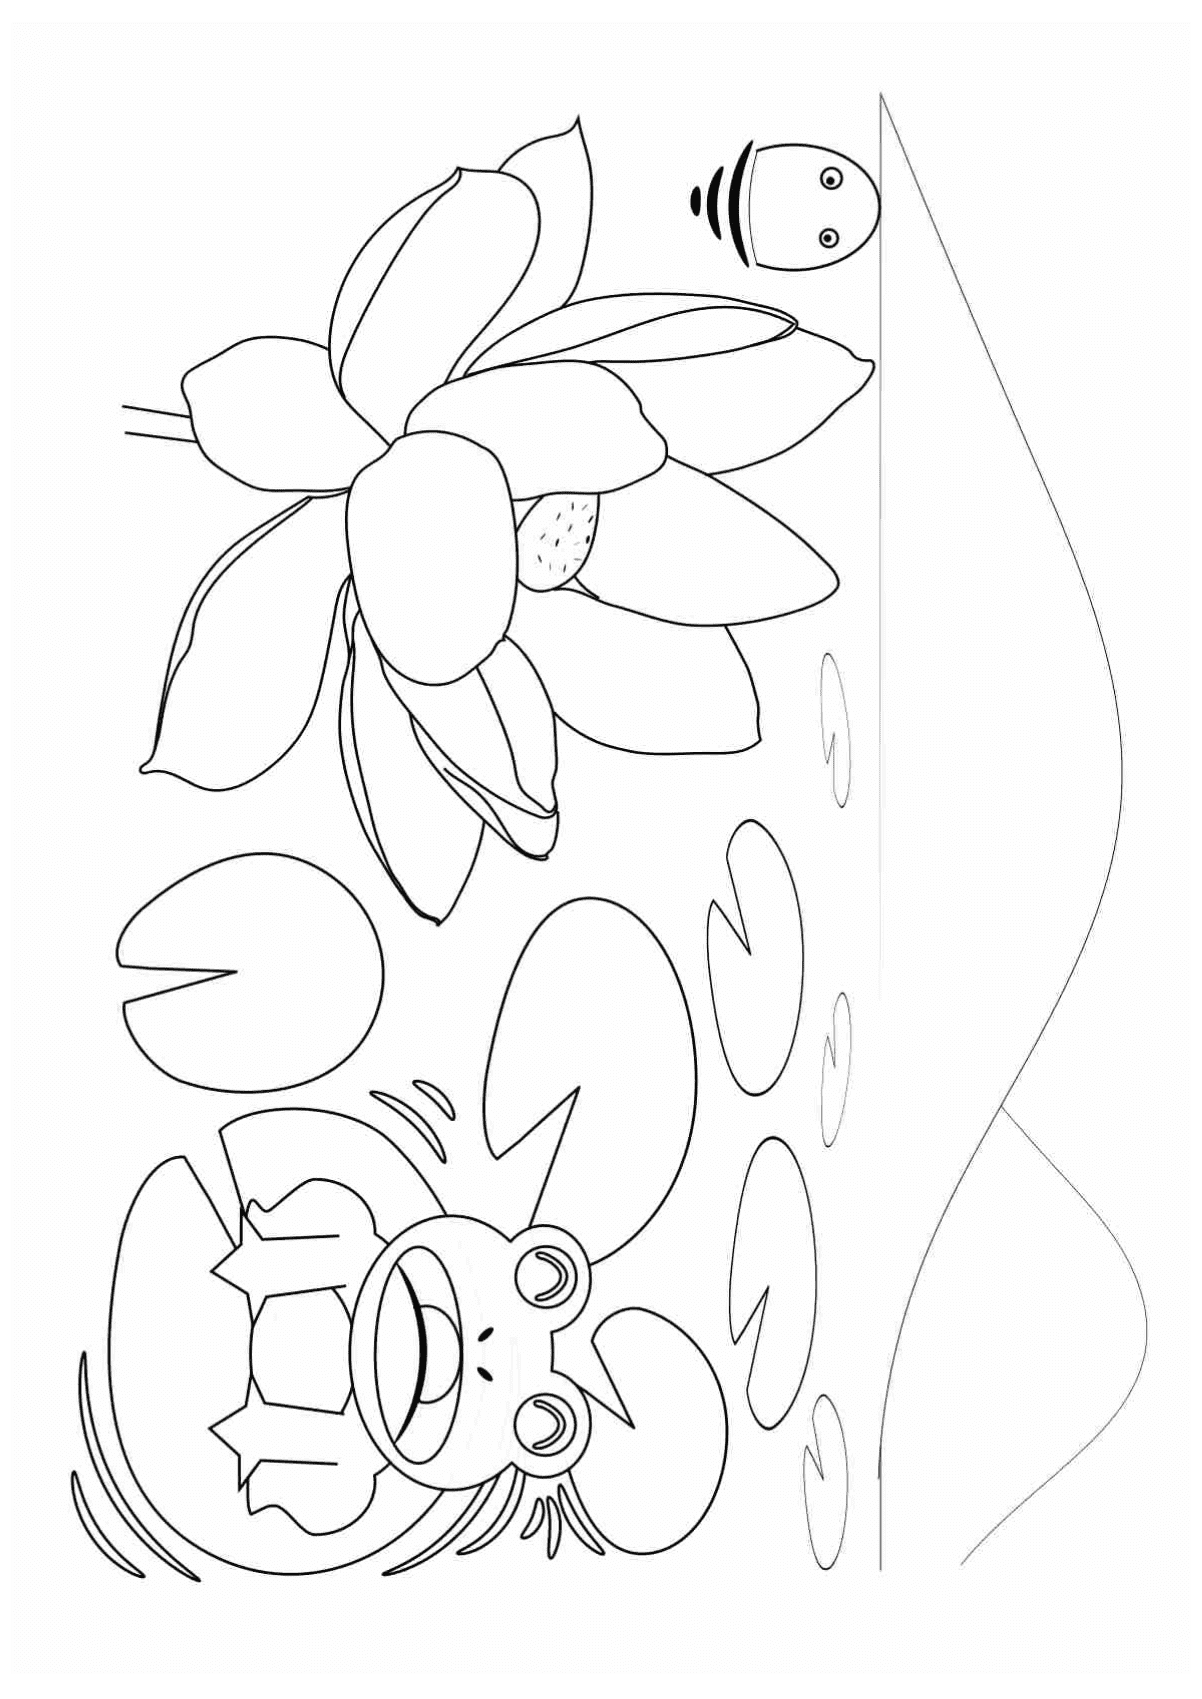 Frog and lotus and mysterious creatures free coloring pages for kids